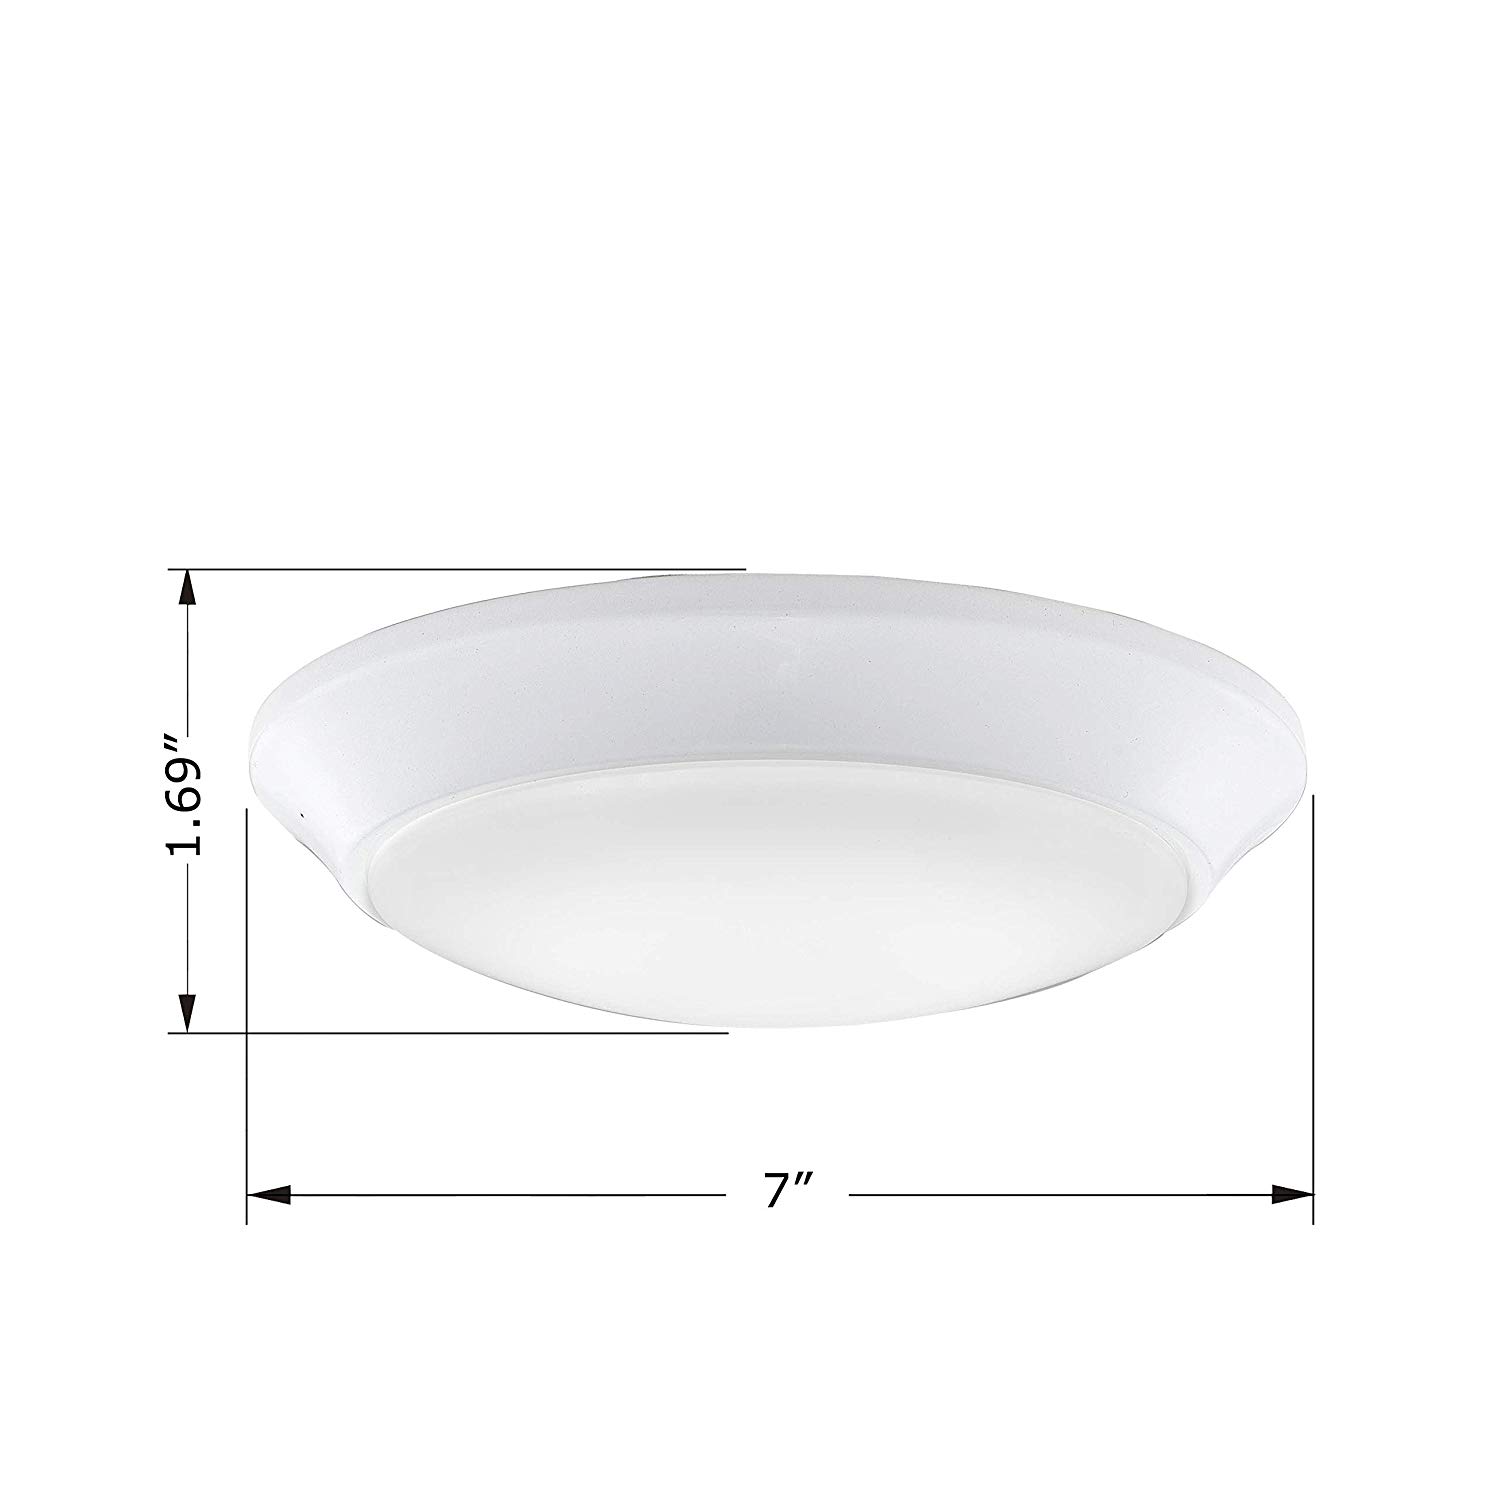 GRUENLICH LED Flush Mount Ceiling Lighting Fixture, 7 Inch Dimmable 12W (75W Replacement) 840 Lumen, Metal Housing with White Finish, ETL and Damp Location Rated, 2-Pack